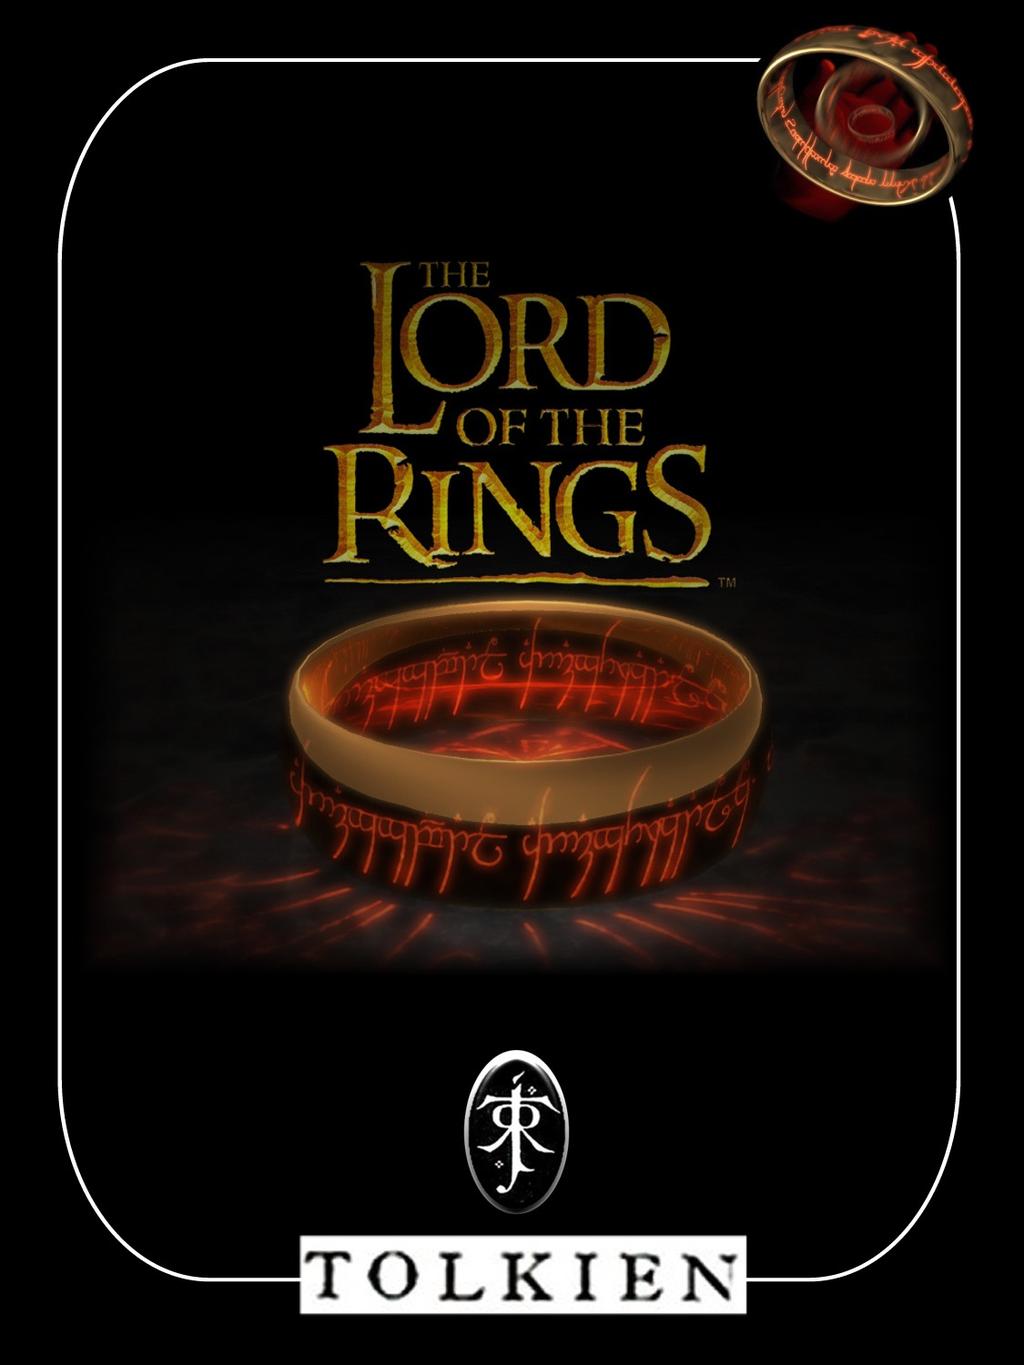 It had incredible power and defeated entire elf/men-armies. Then Isuldur, king of Gondor cut It of its hand and Sauron was defeated. But the ring lived on.